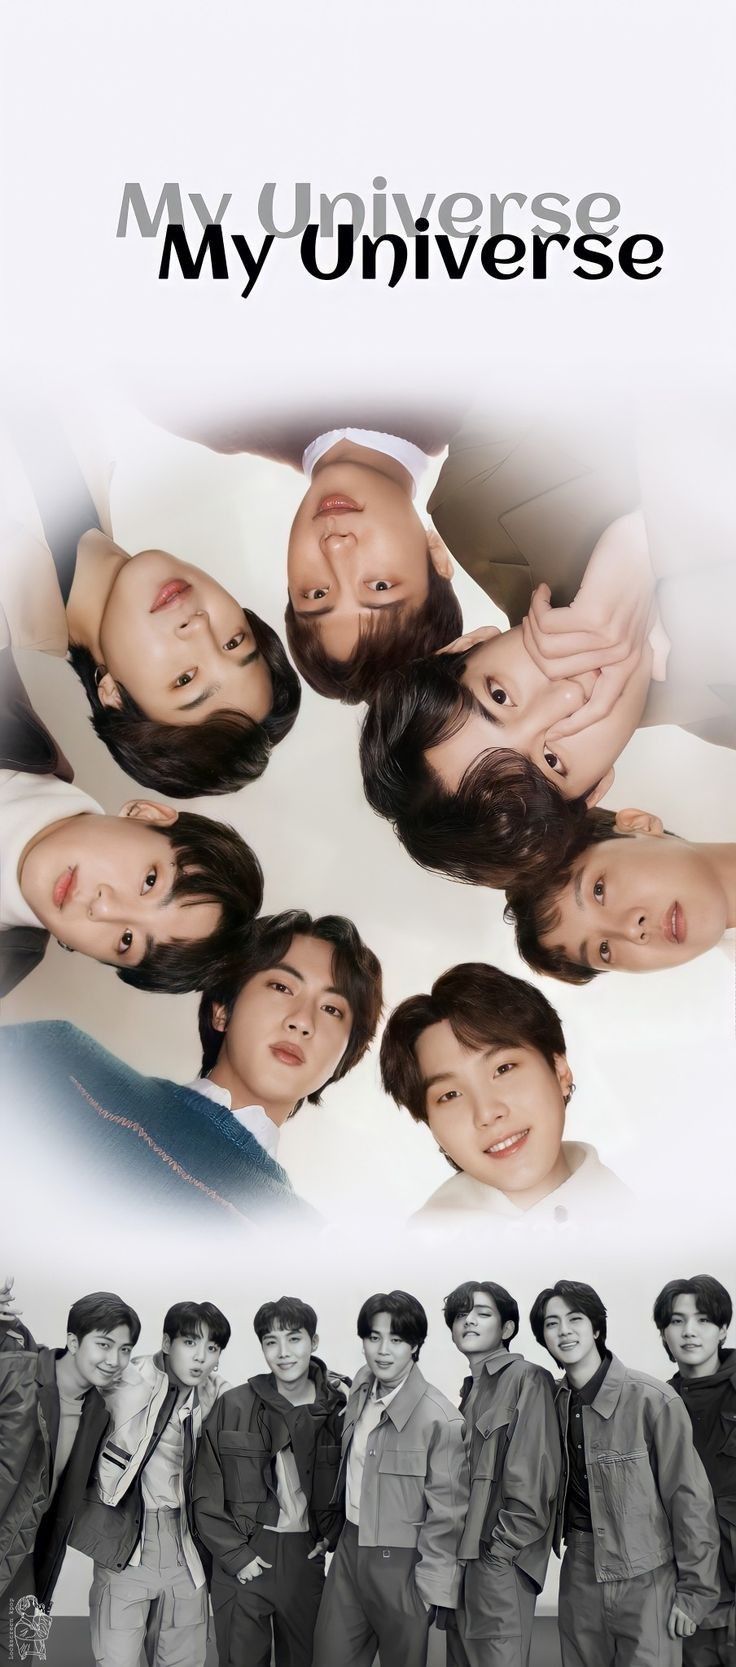 BTS Wallpaper 2022 APK for Android Download